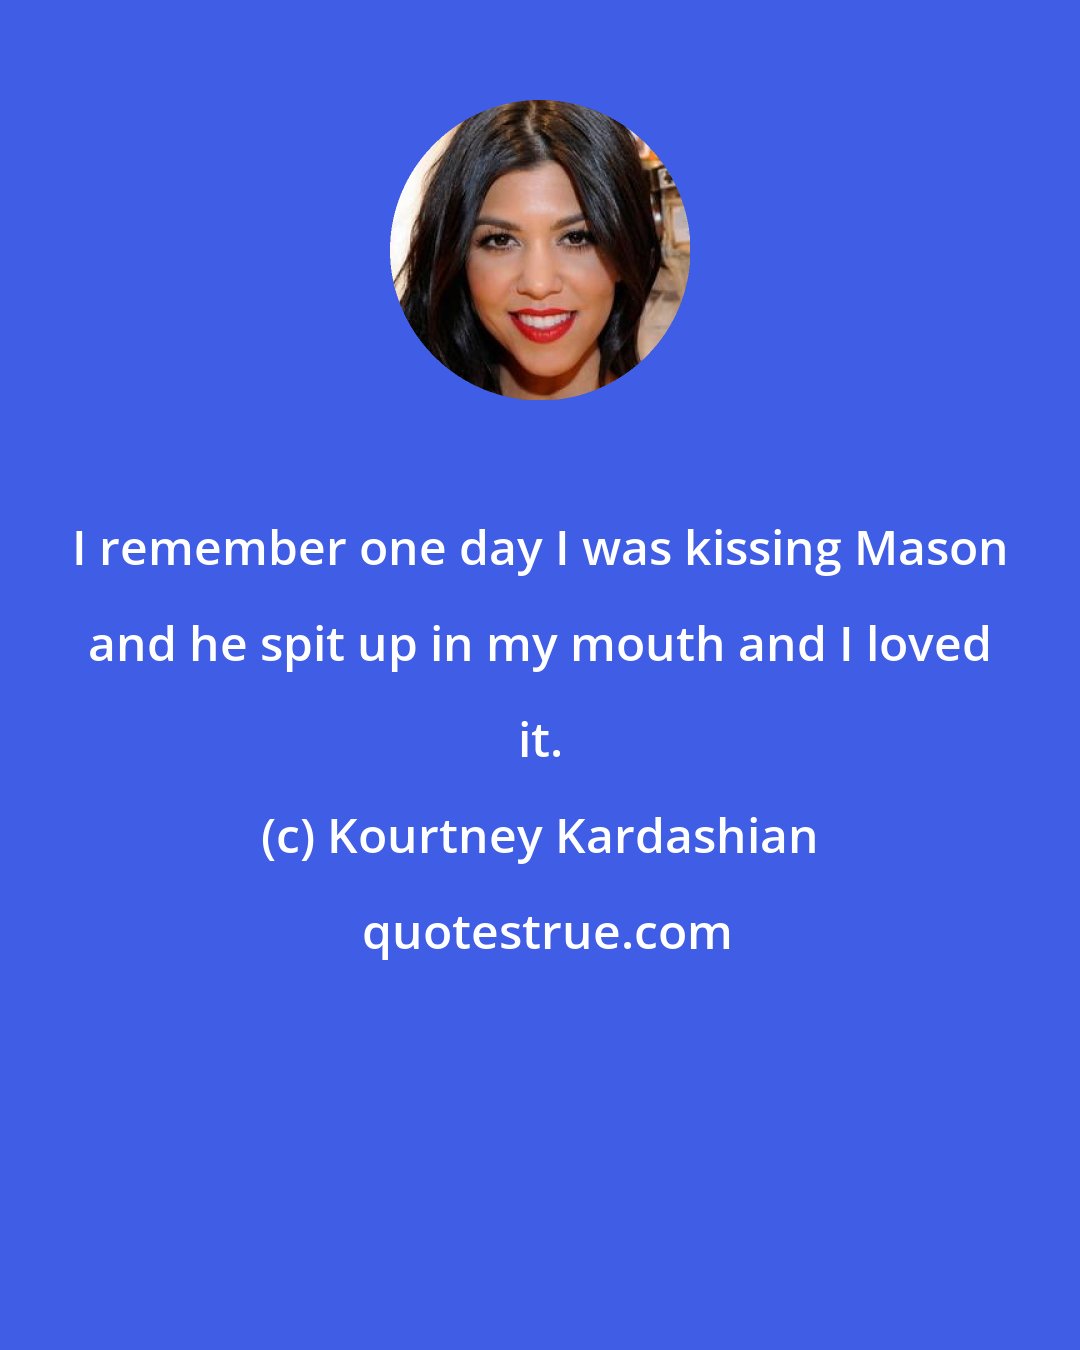 Kourtney Kardashian: I remember one day I was kissing Mason and he spit up in my mouth and I loved it.